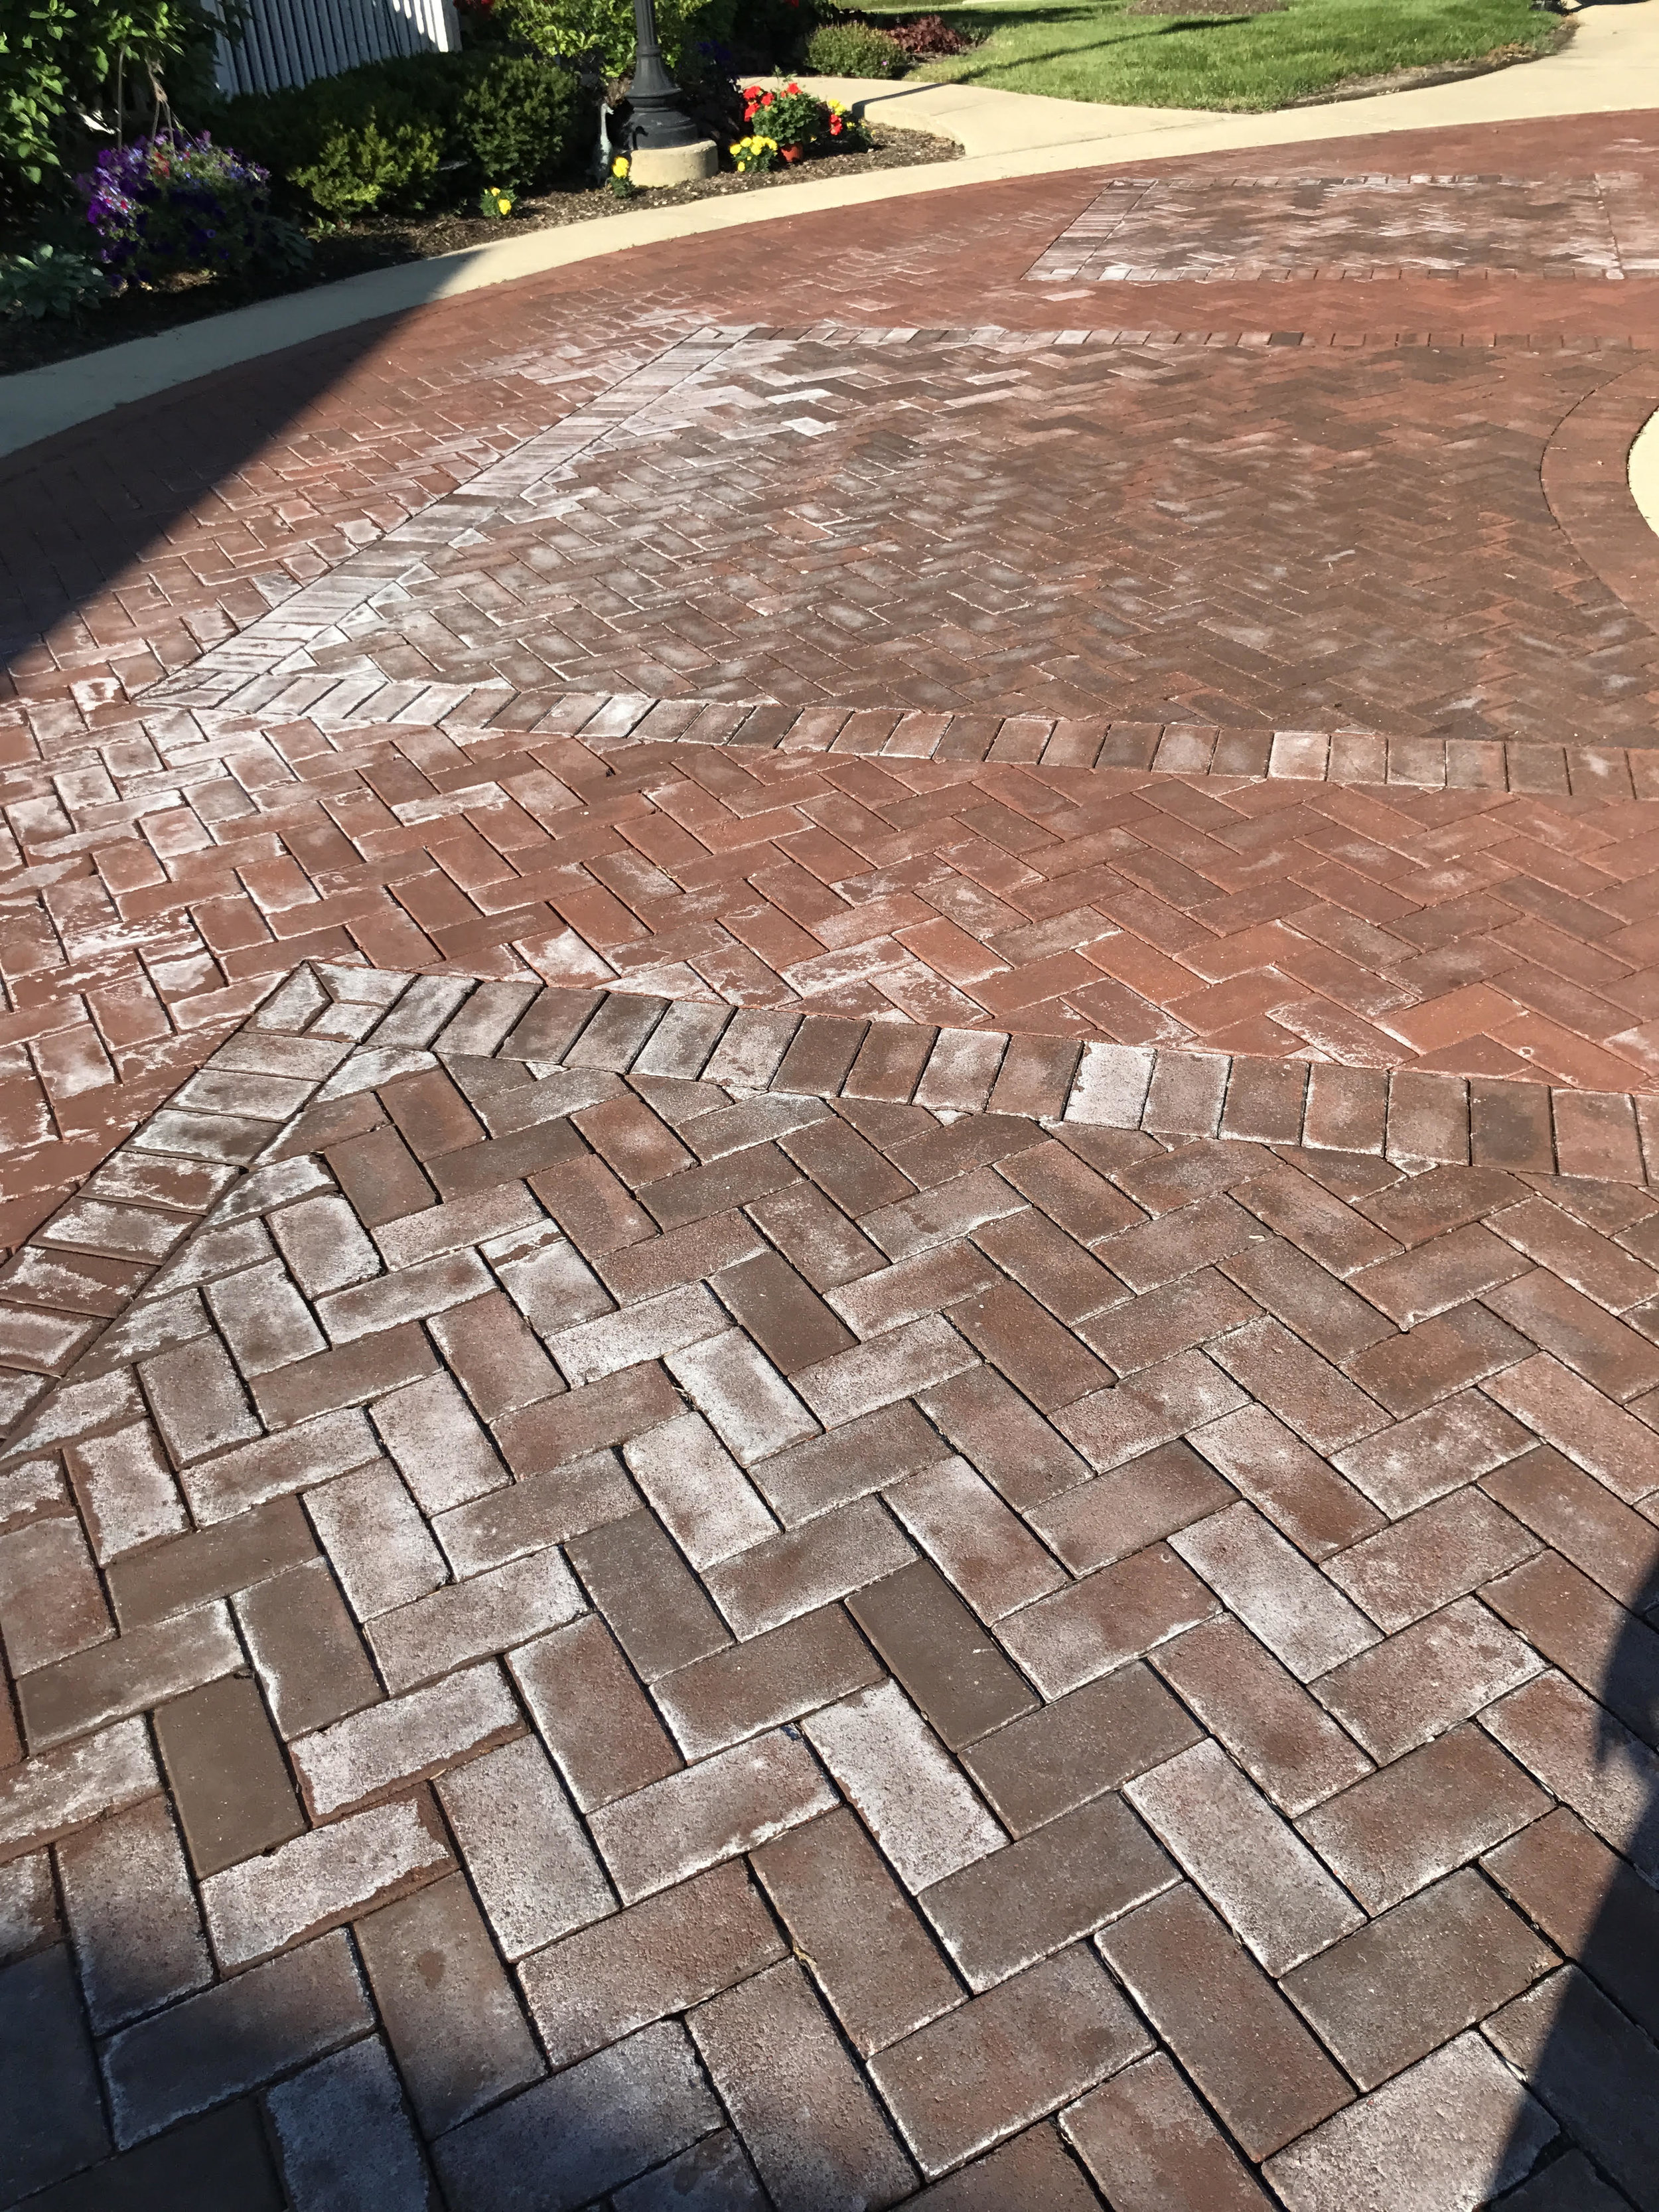 red-clay-pavers-white-discoloration.jpg